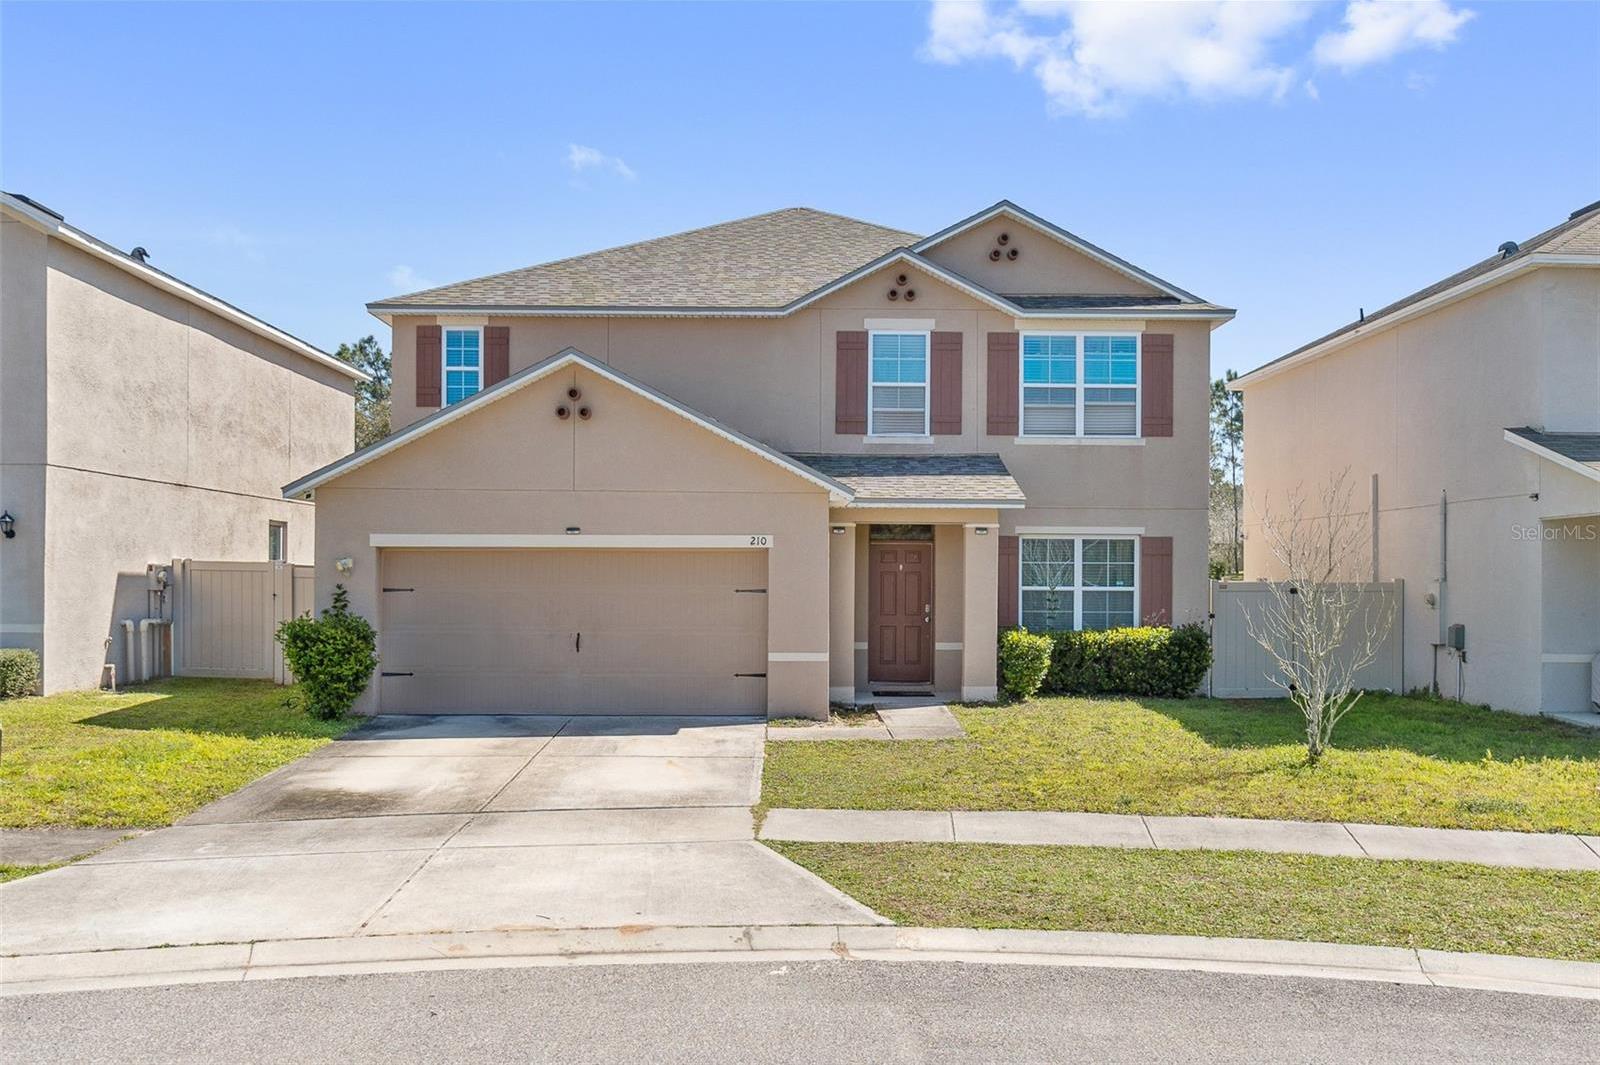 Photo one of 210 Lazy Willow Dr Davenport FL 33897 | MLS O6165400